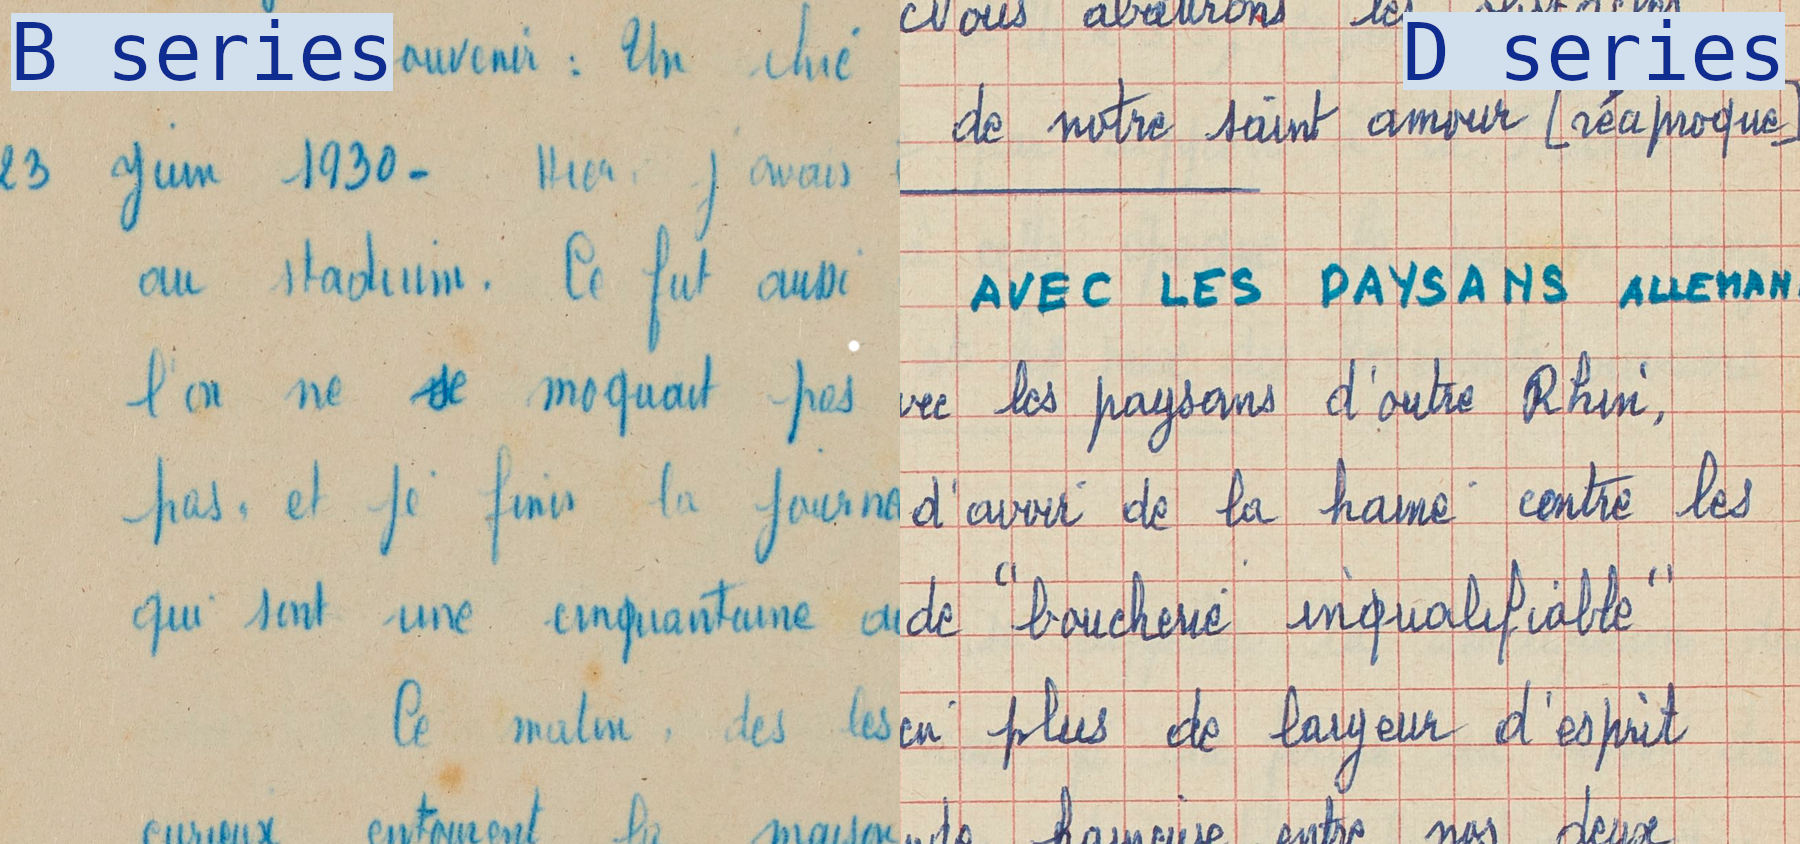 two extracts of Peraire's notebooks side by side, on the left the image is taken from the B series, on the right the image is taken from the D series.